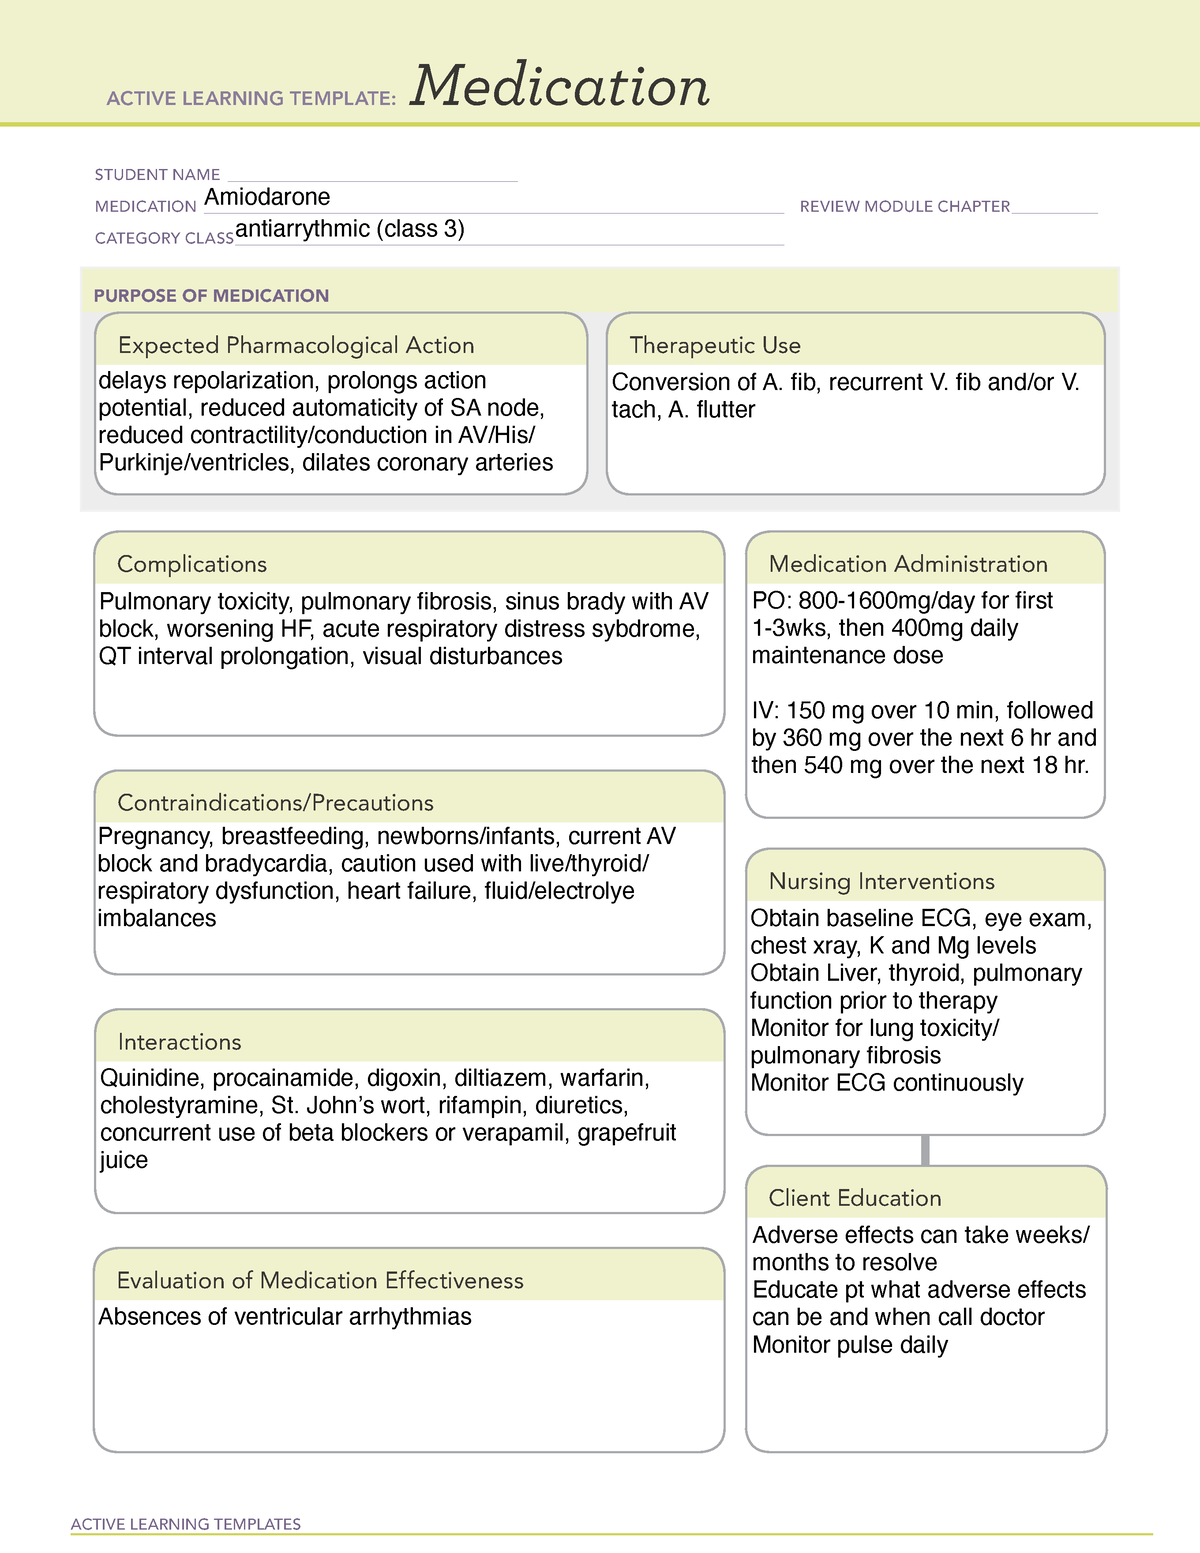 amiodarone-copy-med-cards-active-learning-templates-medication